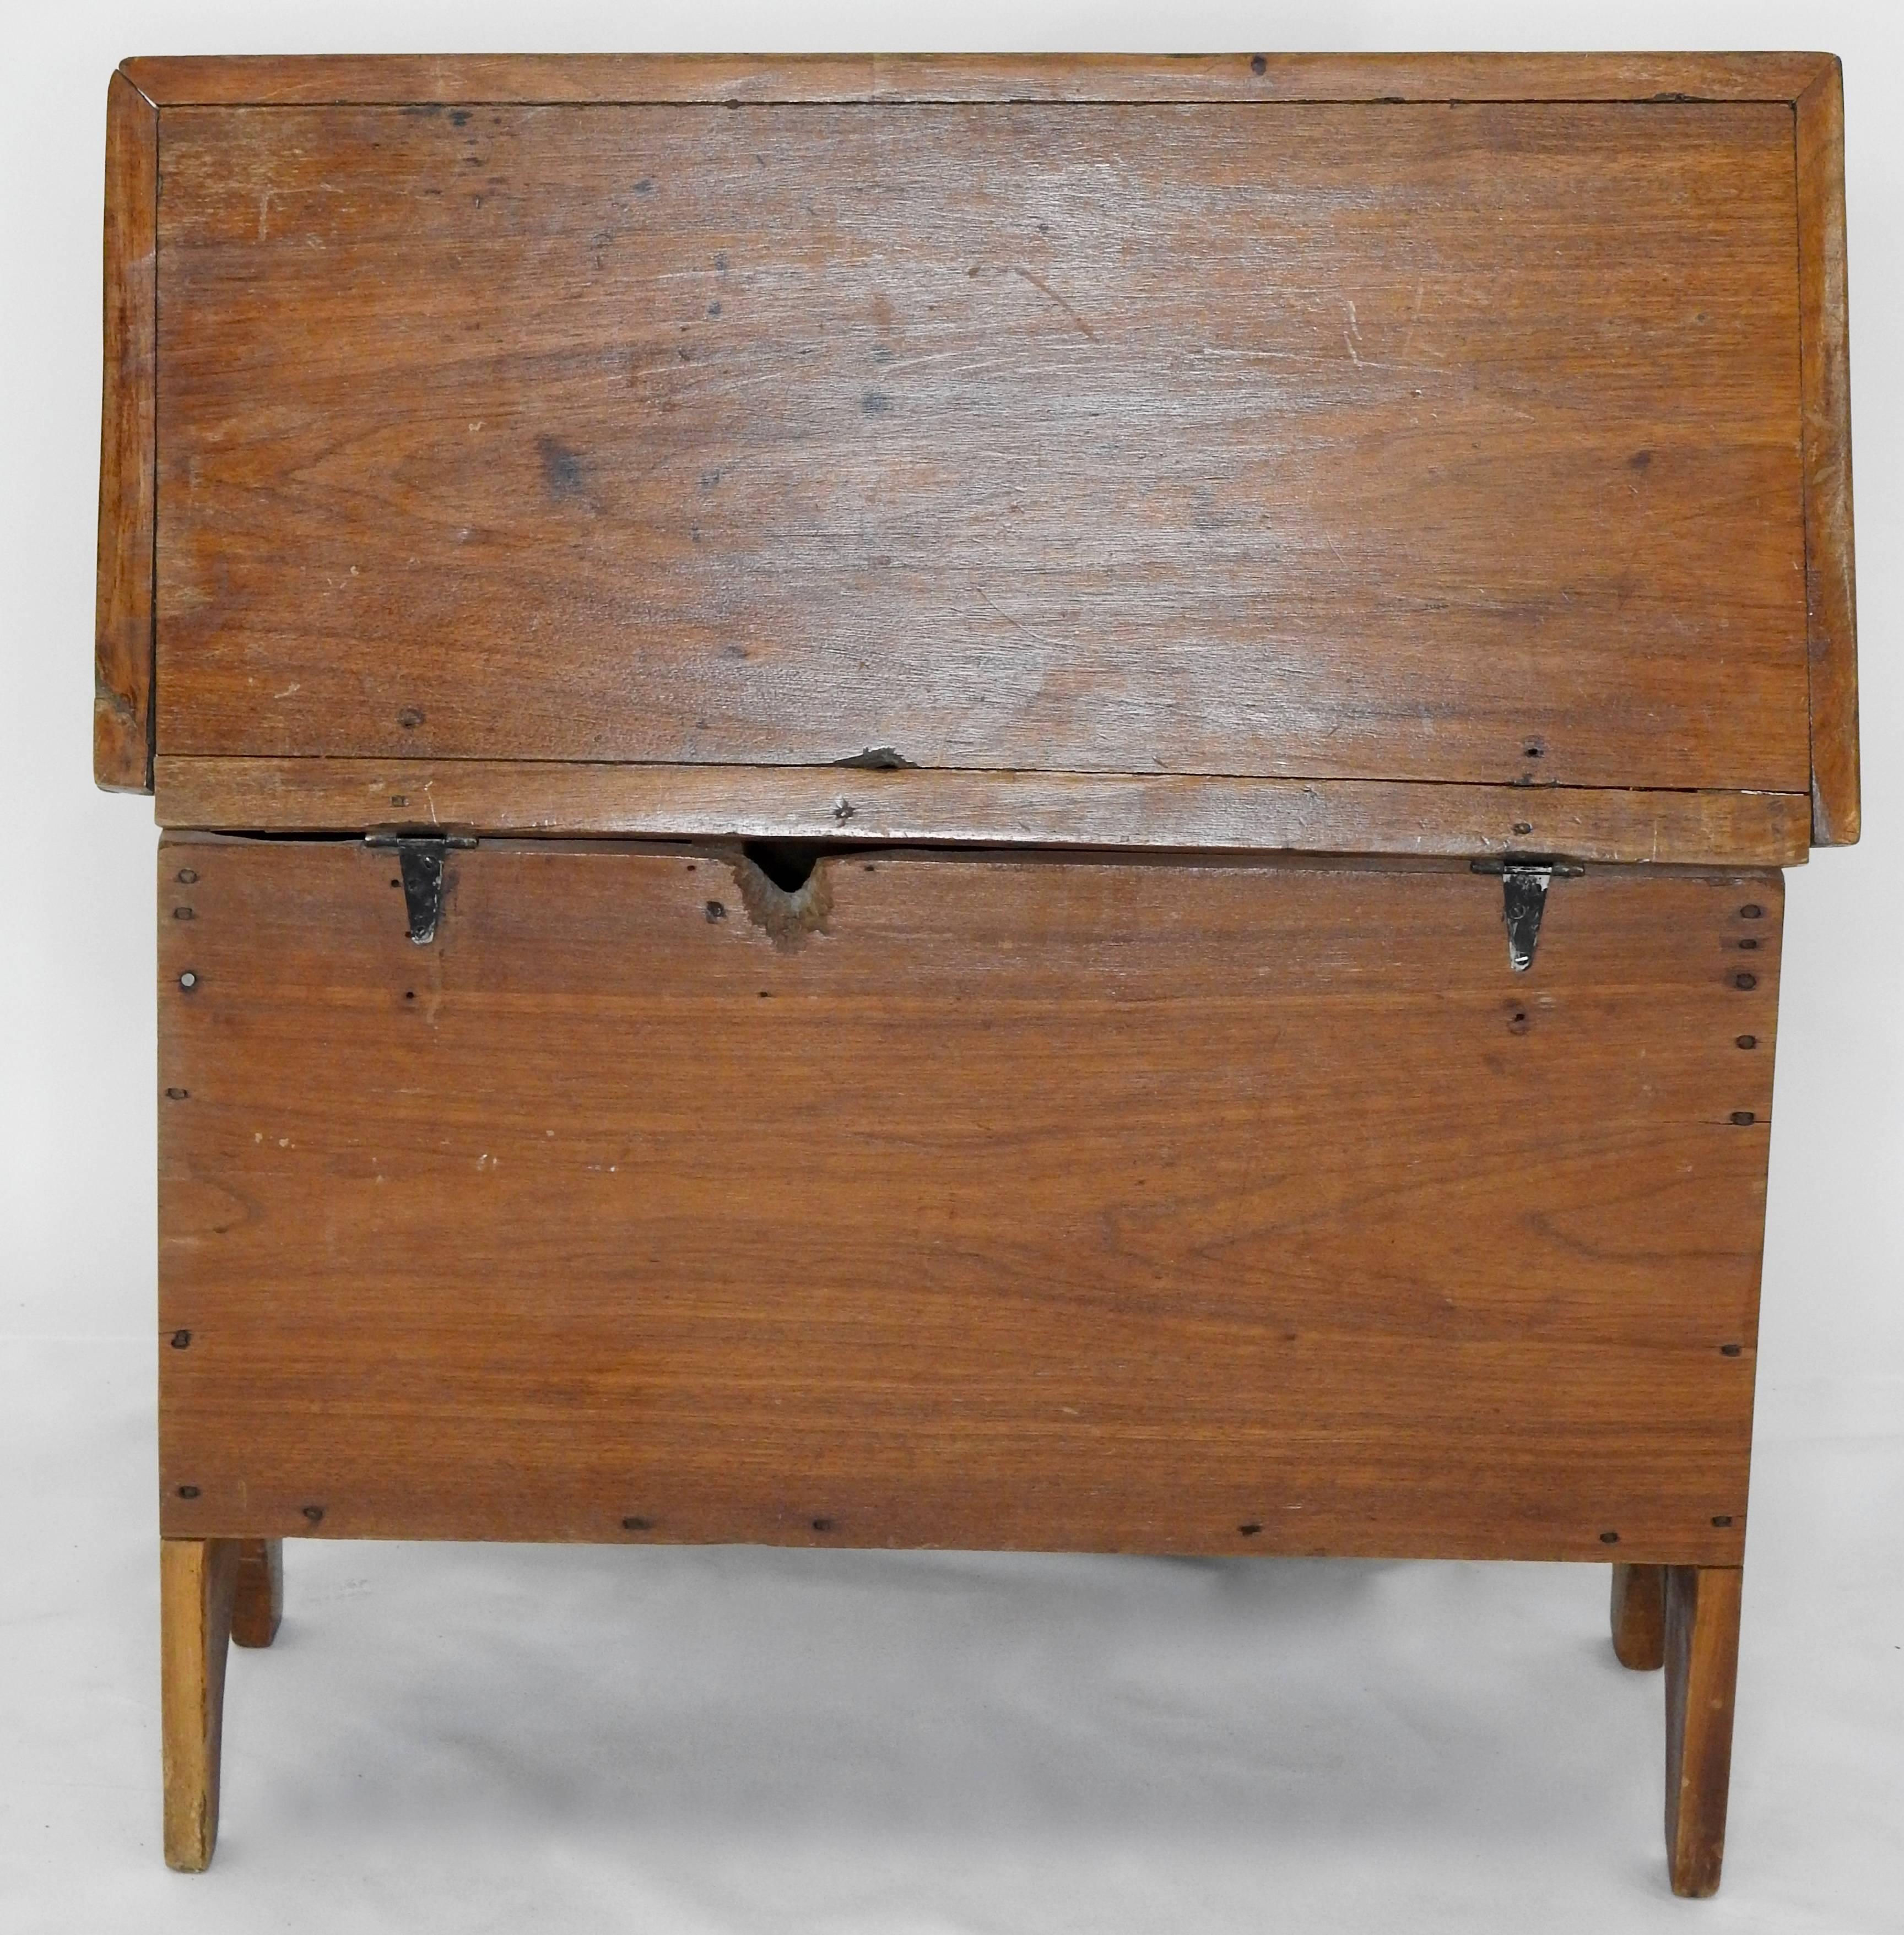 This is a Classic 19th century walnut sugar trunk with lift top lid. This simple yet stately piece had a warm natural tone. It sits on a bracket type leg that is formed by two semicircles on either side. It does not have the lock mechanism.